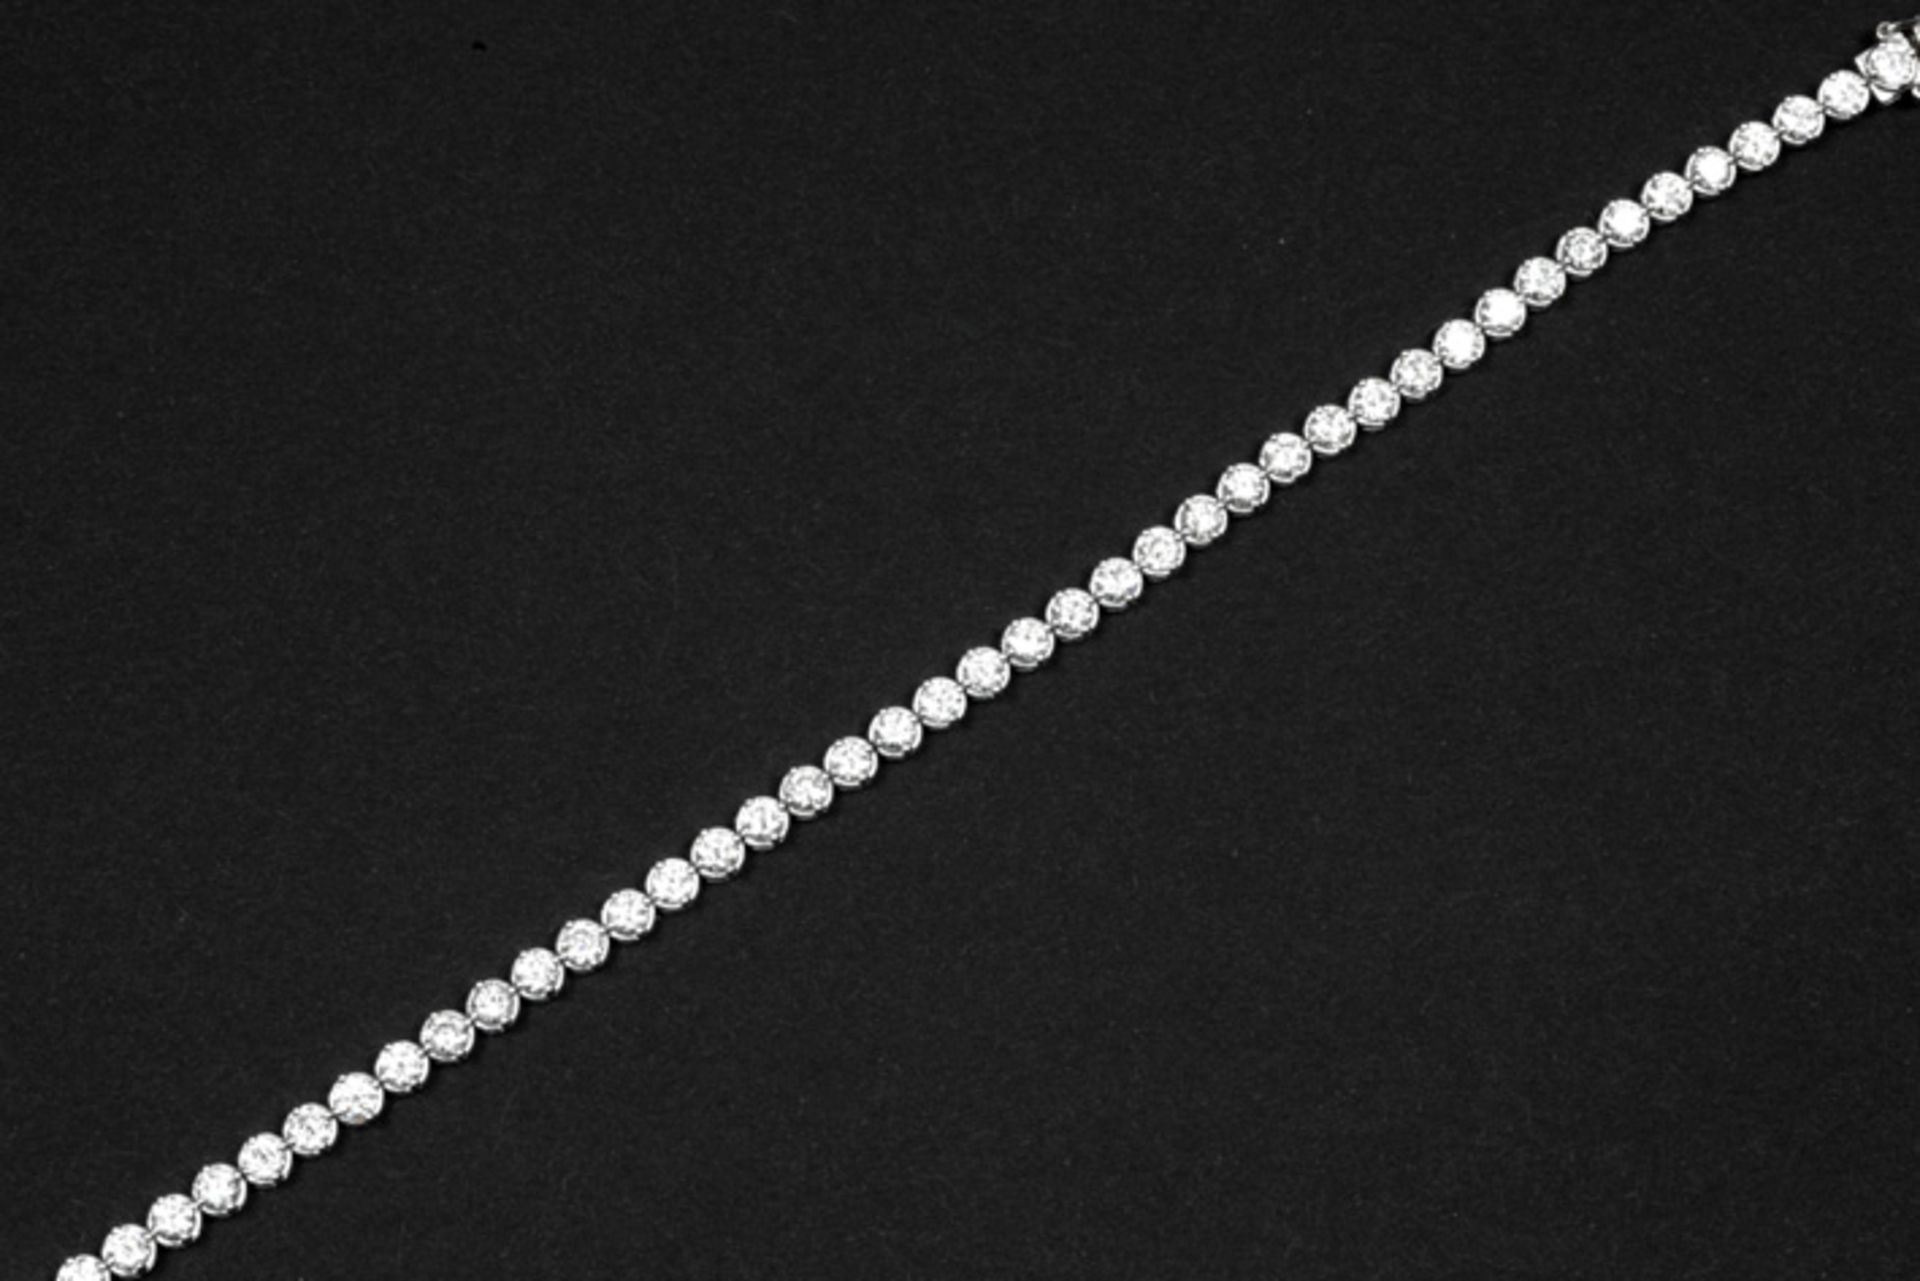 bracelet in white gold (18 carat) with at least 4,20 carat of high quality brilliant cut diamonds || - Image 2 of 2